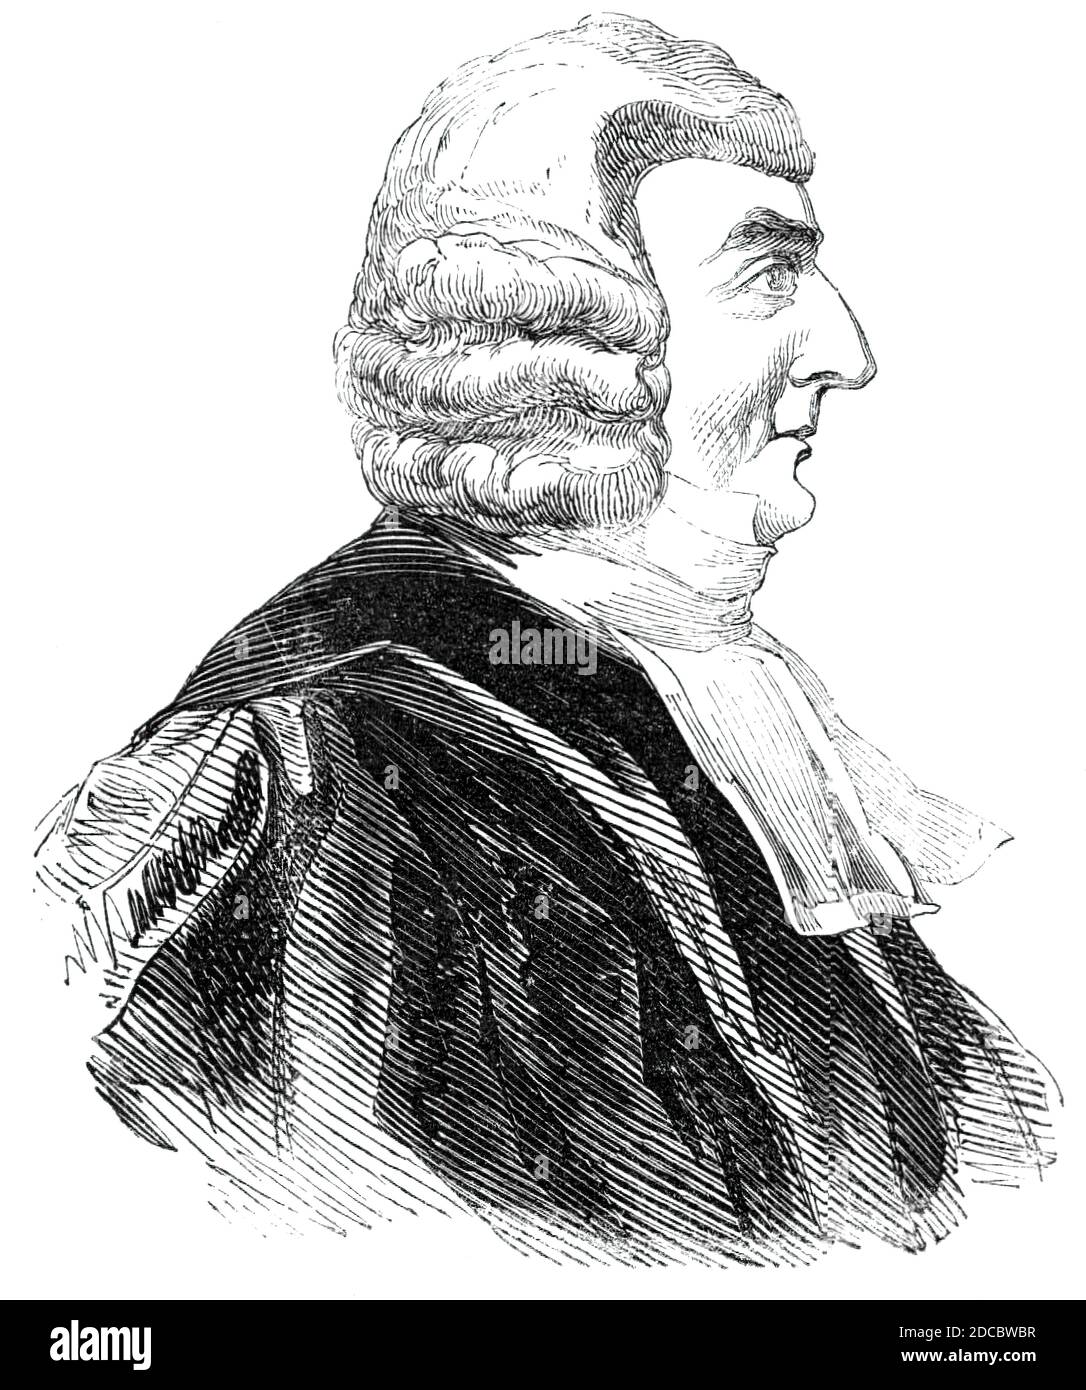 Lord Denman, 1844. Portrait of British lawyer, judge and politician Thomas Denman. From &quot;Illustrated London News&quot;, 1844, Vol I. Stock Photo